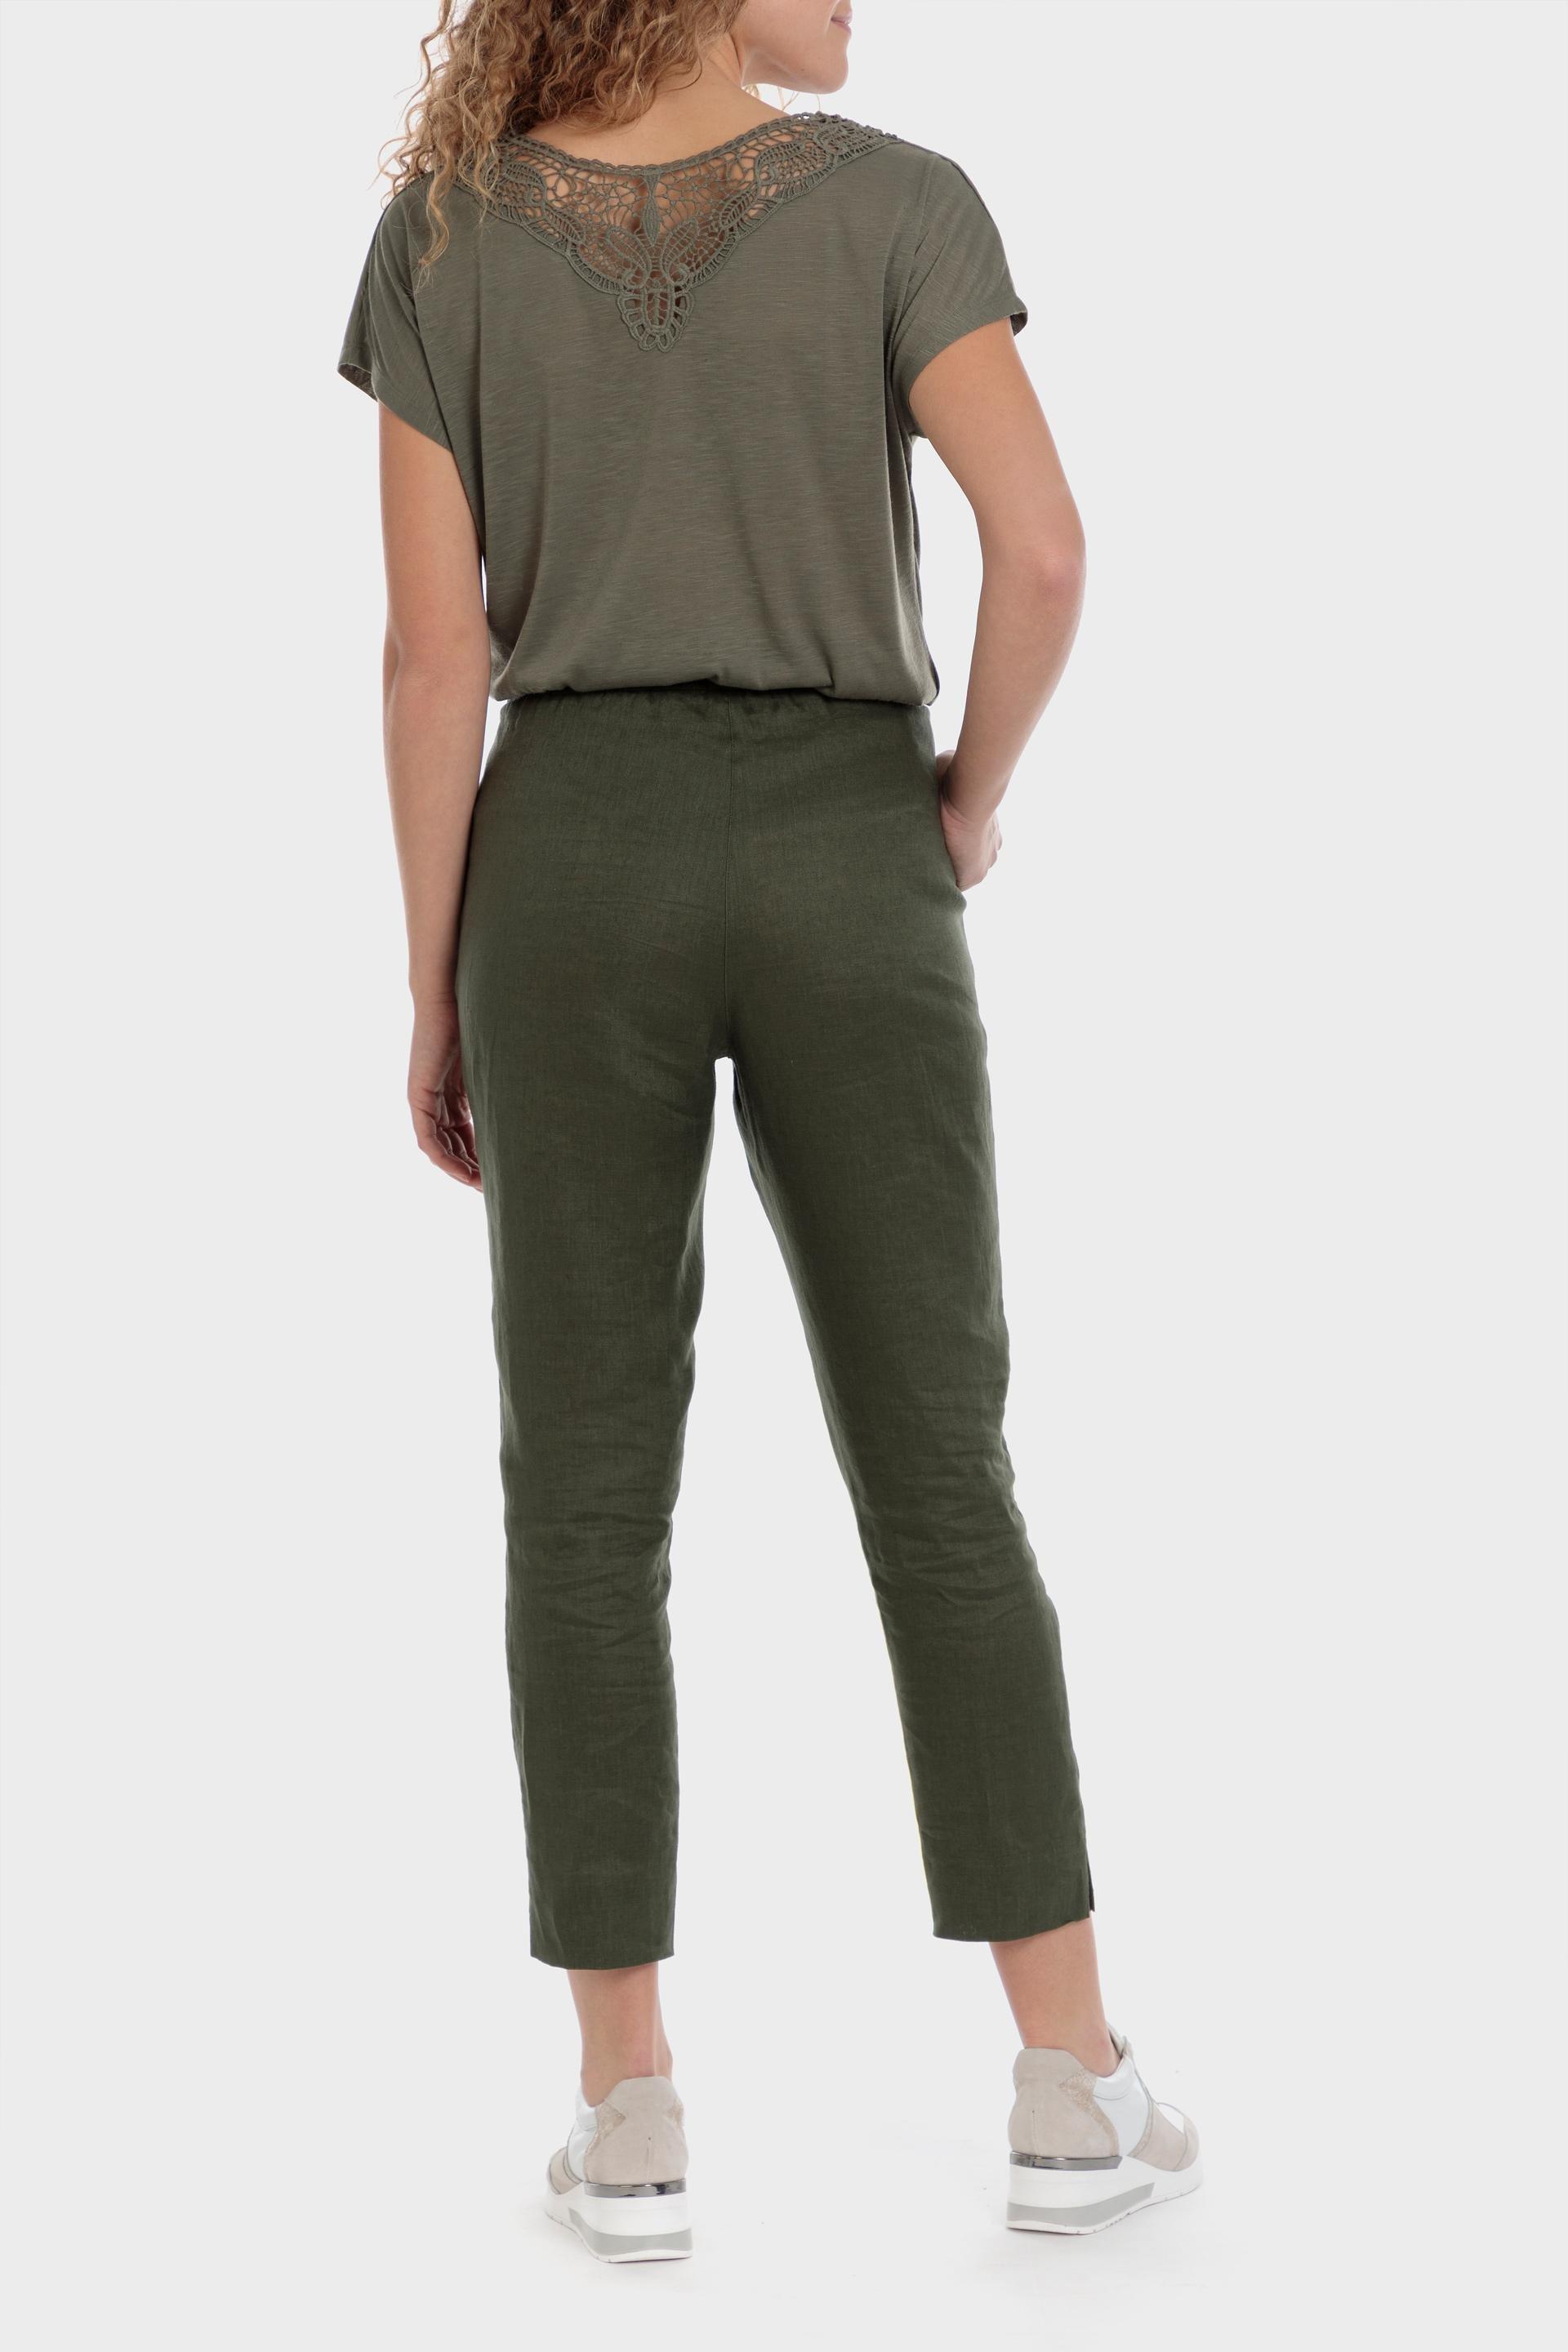 Punt Roma - Green Linen Trousers